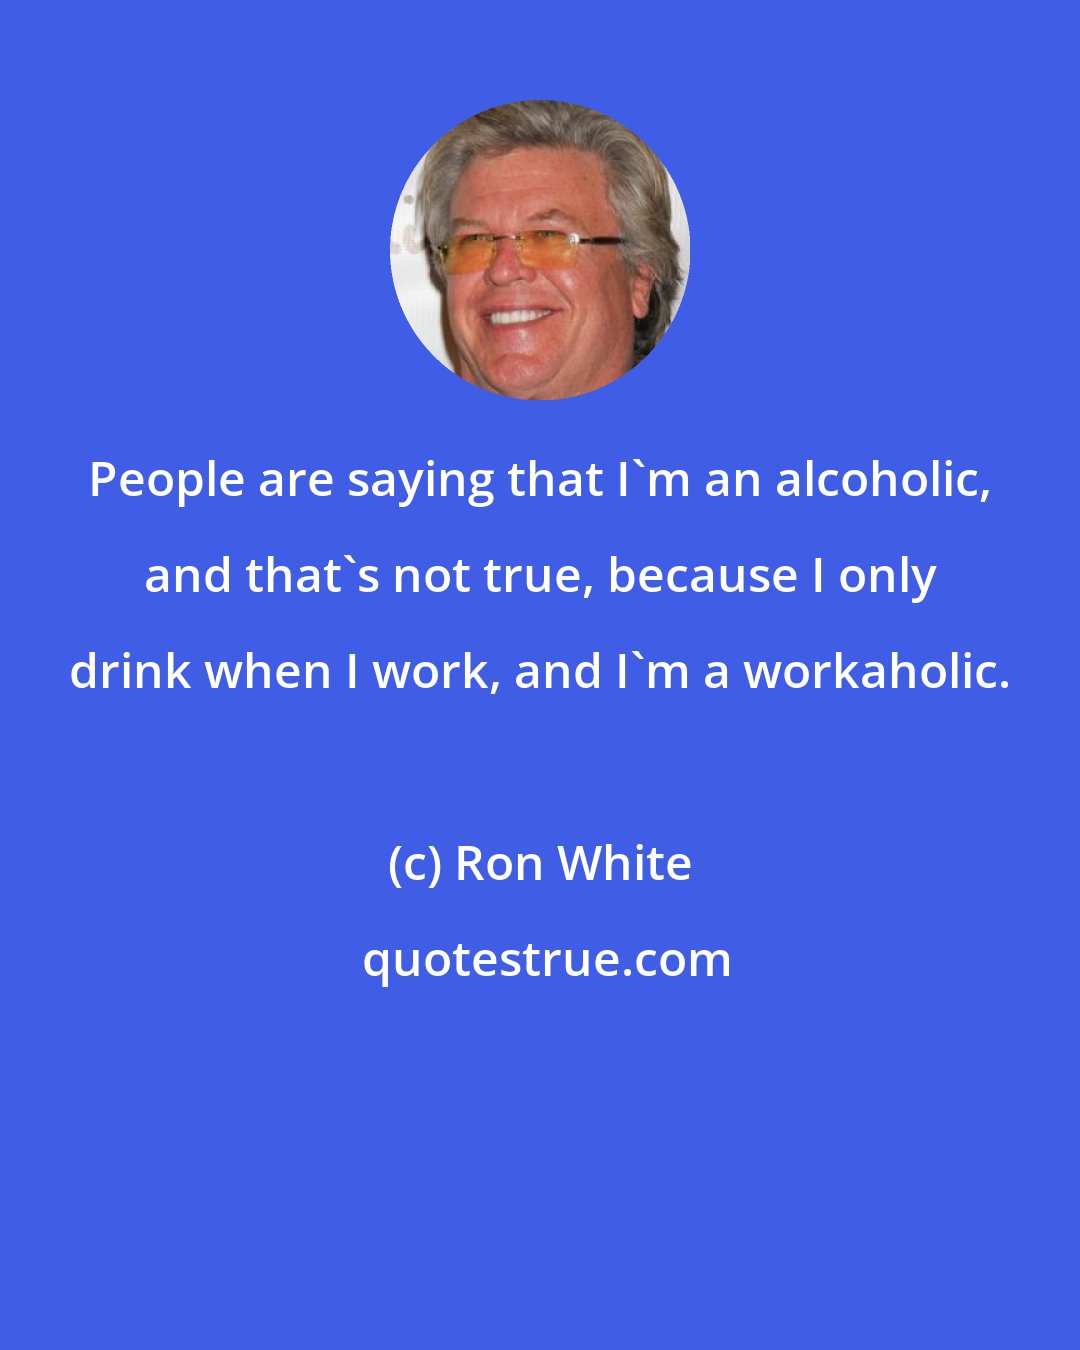 Ron White: People are saying that I'm an alcoholic, and that's not true, because I only drink when I work, and I'm a workaholic.